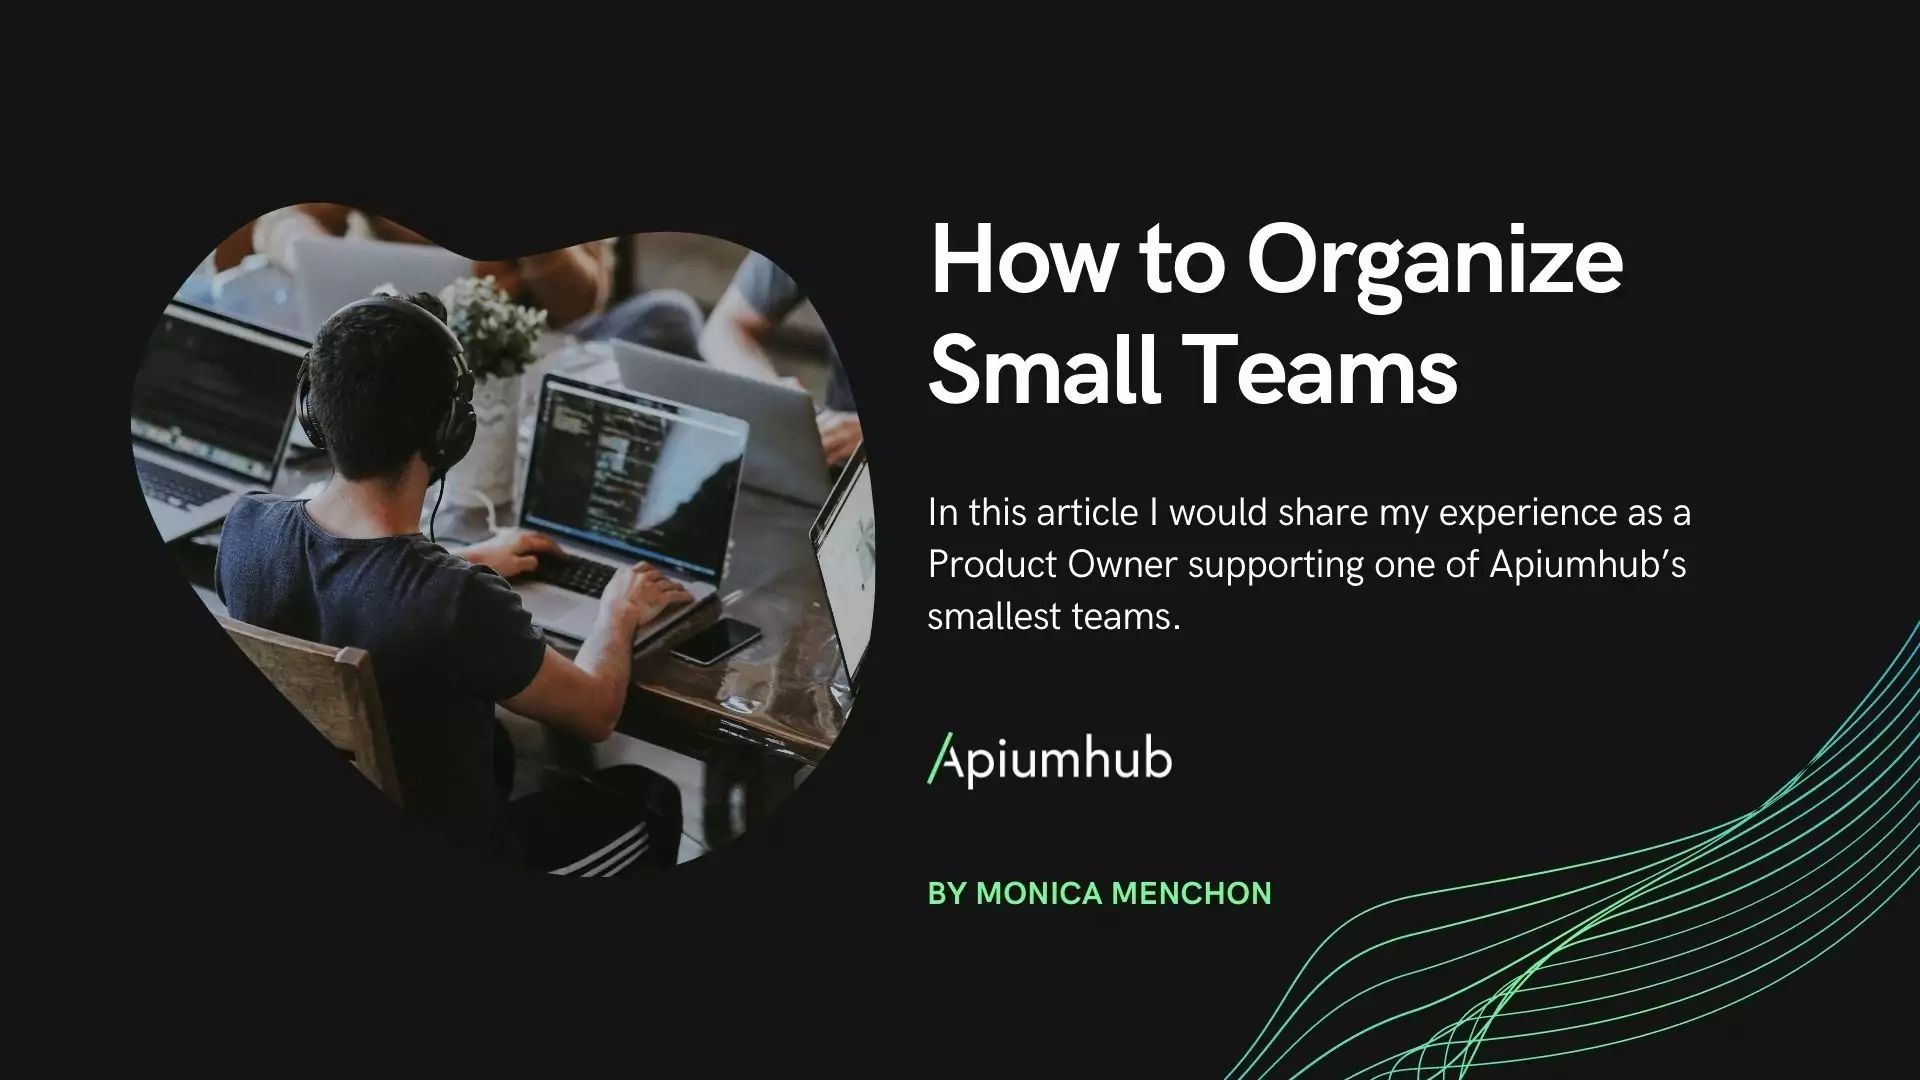 How to organize small teams